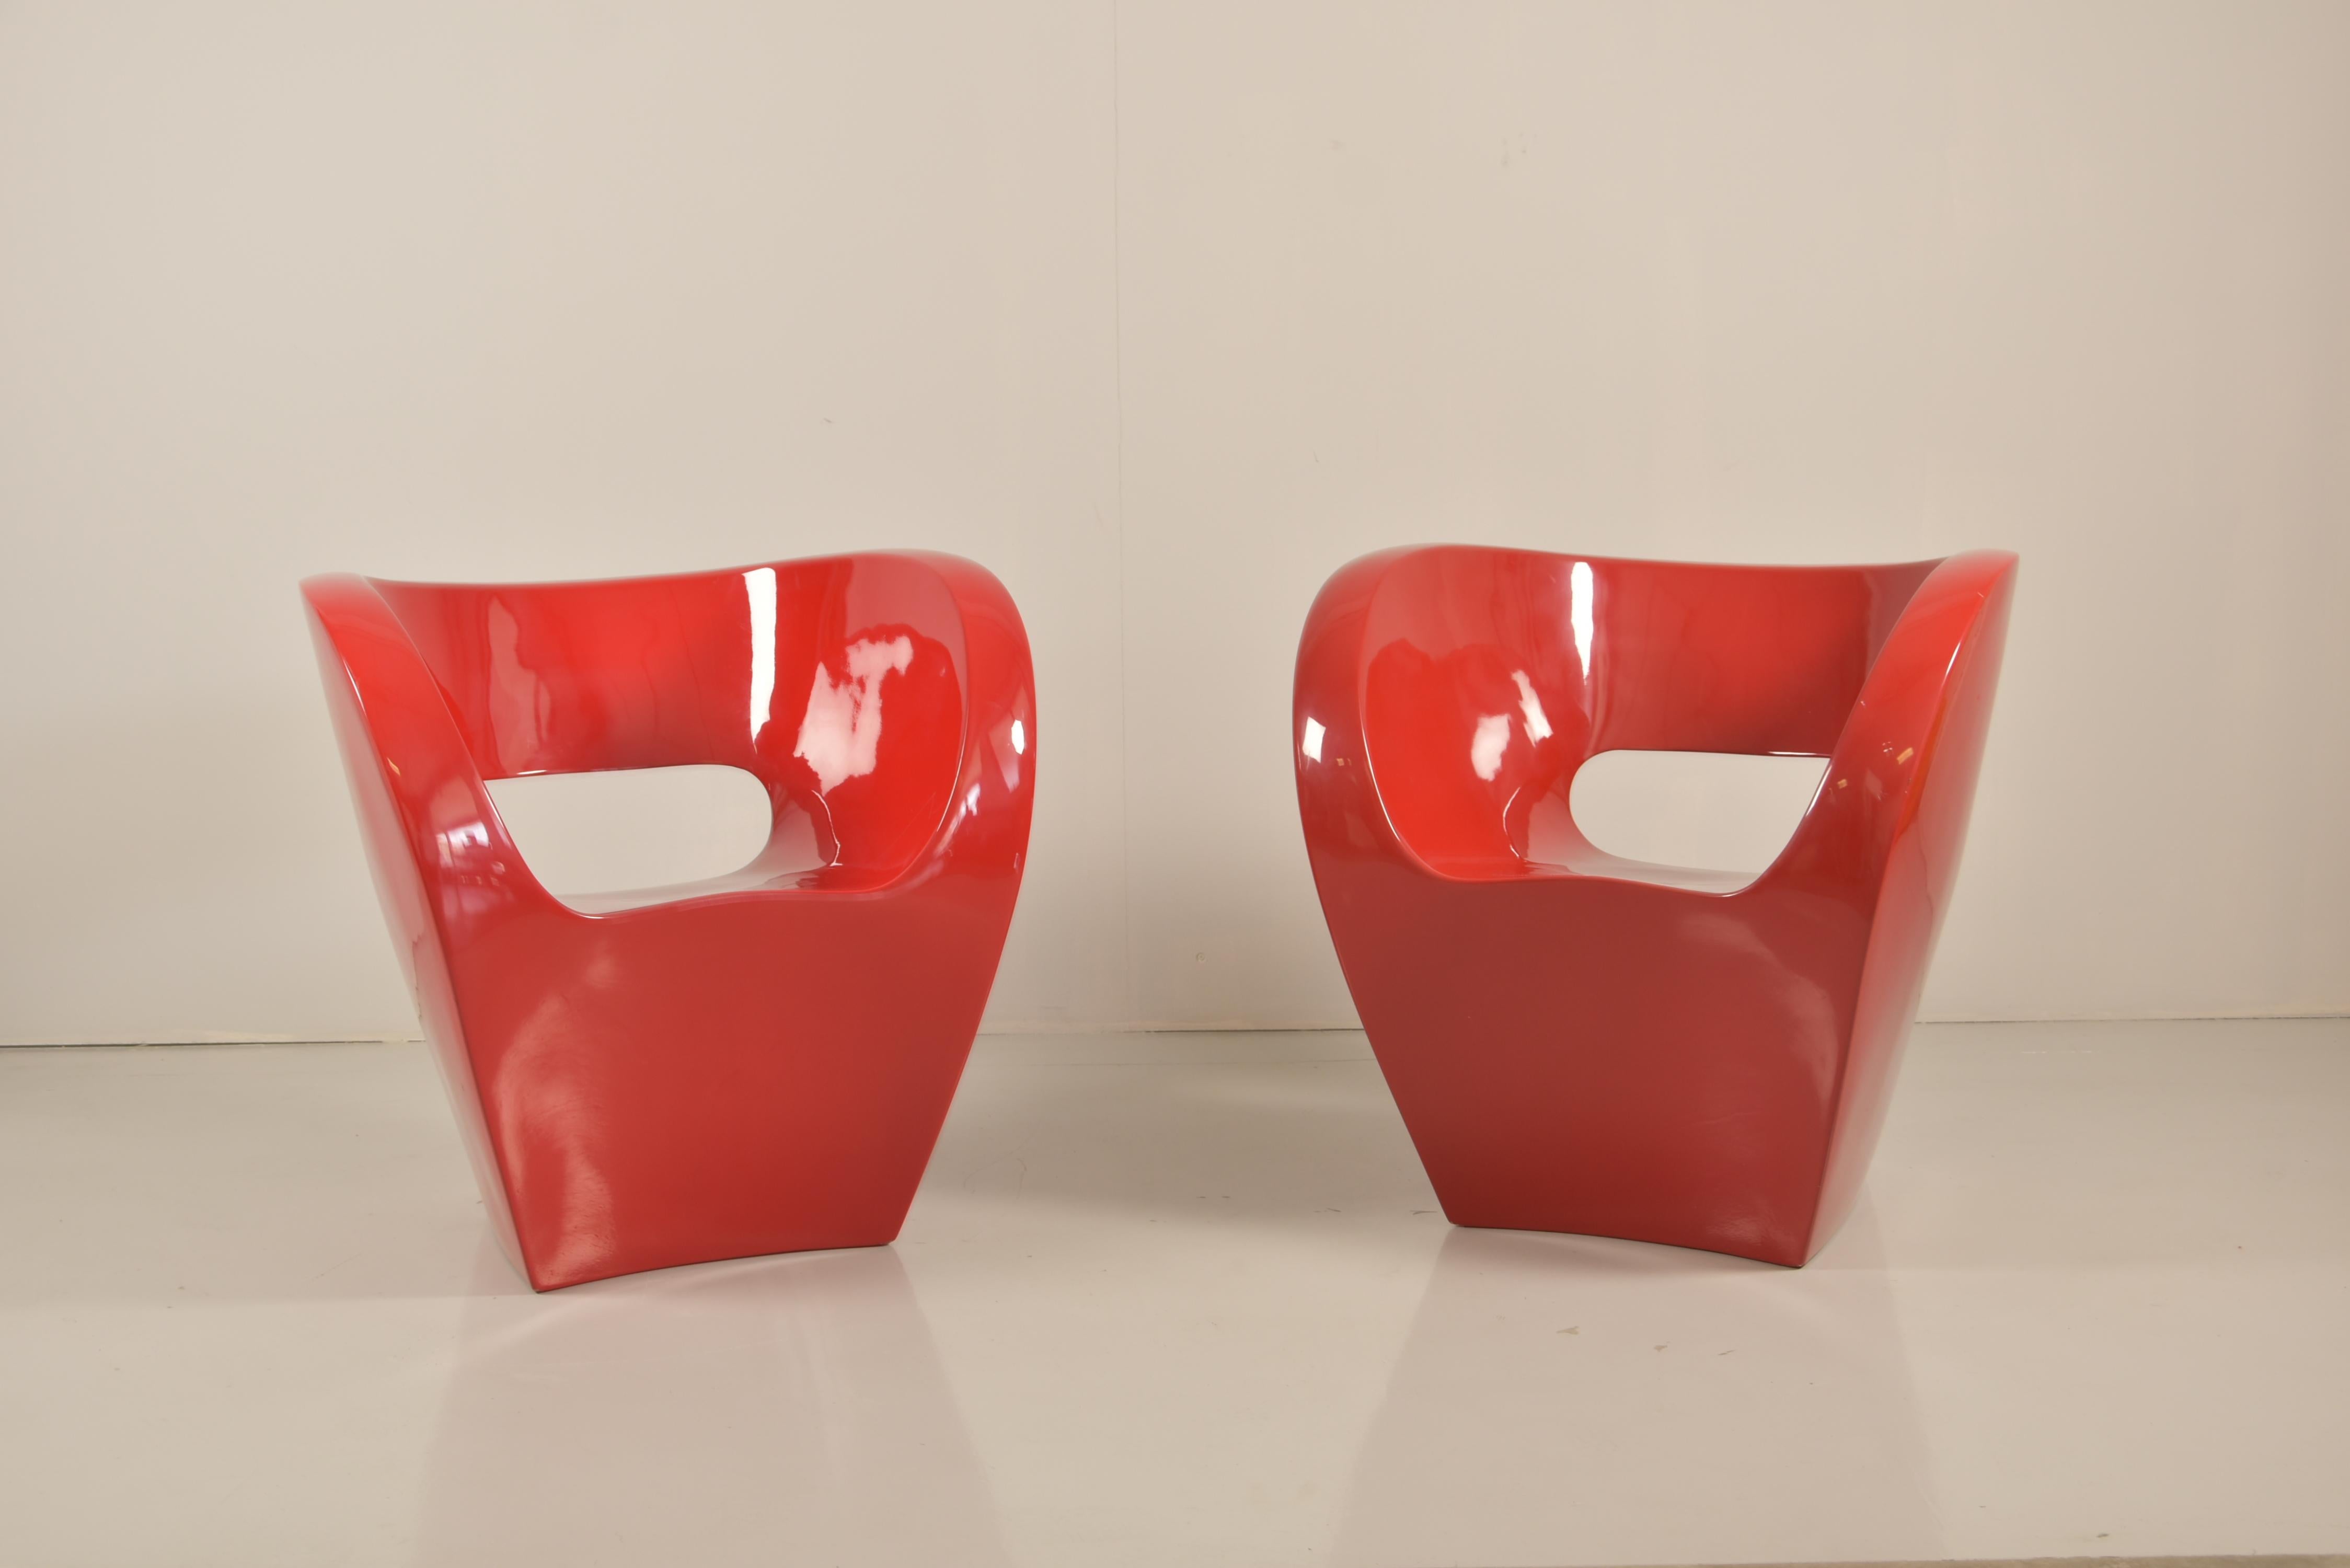 Pair of little Albert black lacquered polyethylene armchairs, designed in 2000 by Ron Arad (Tel-Aviv, 1951) for the Italian design furniture manufacturer Moroso. This iconic model is part of the popular Victoria and Albert Collection.